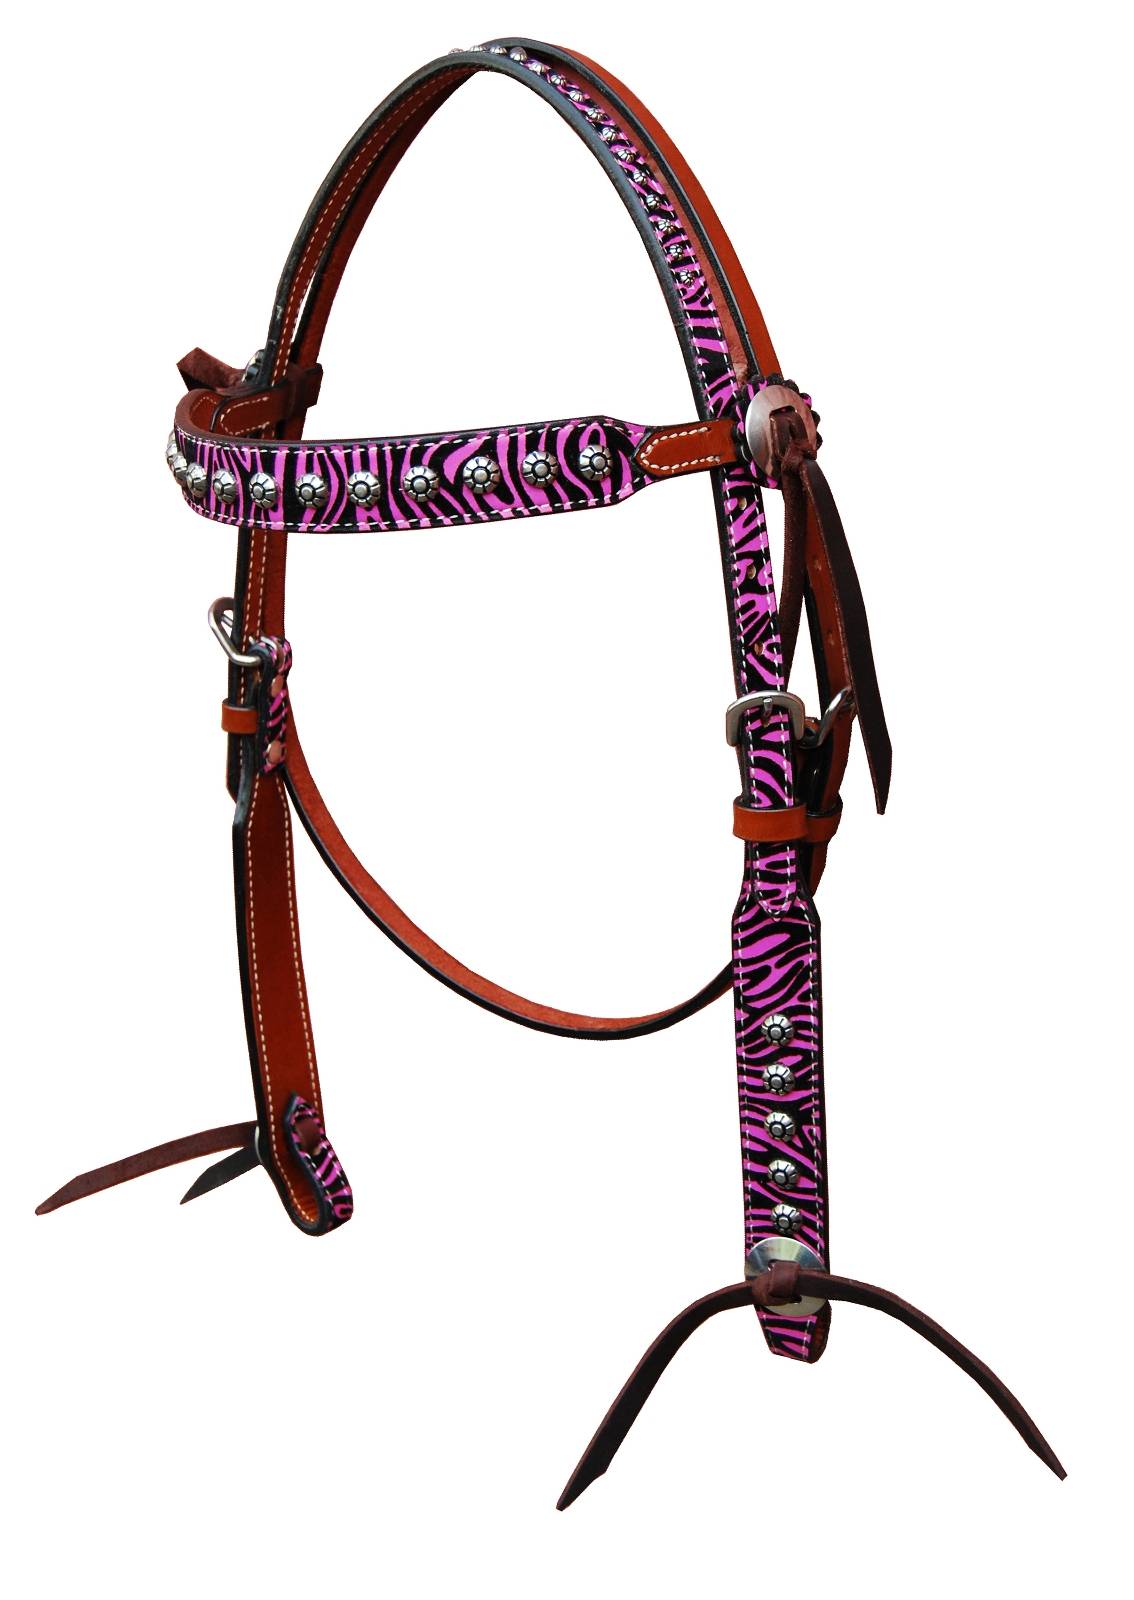 Turn-Two Browband Headstall - Chasing Wild